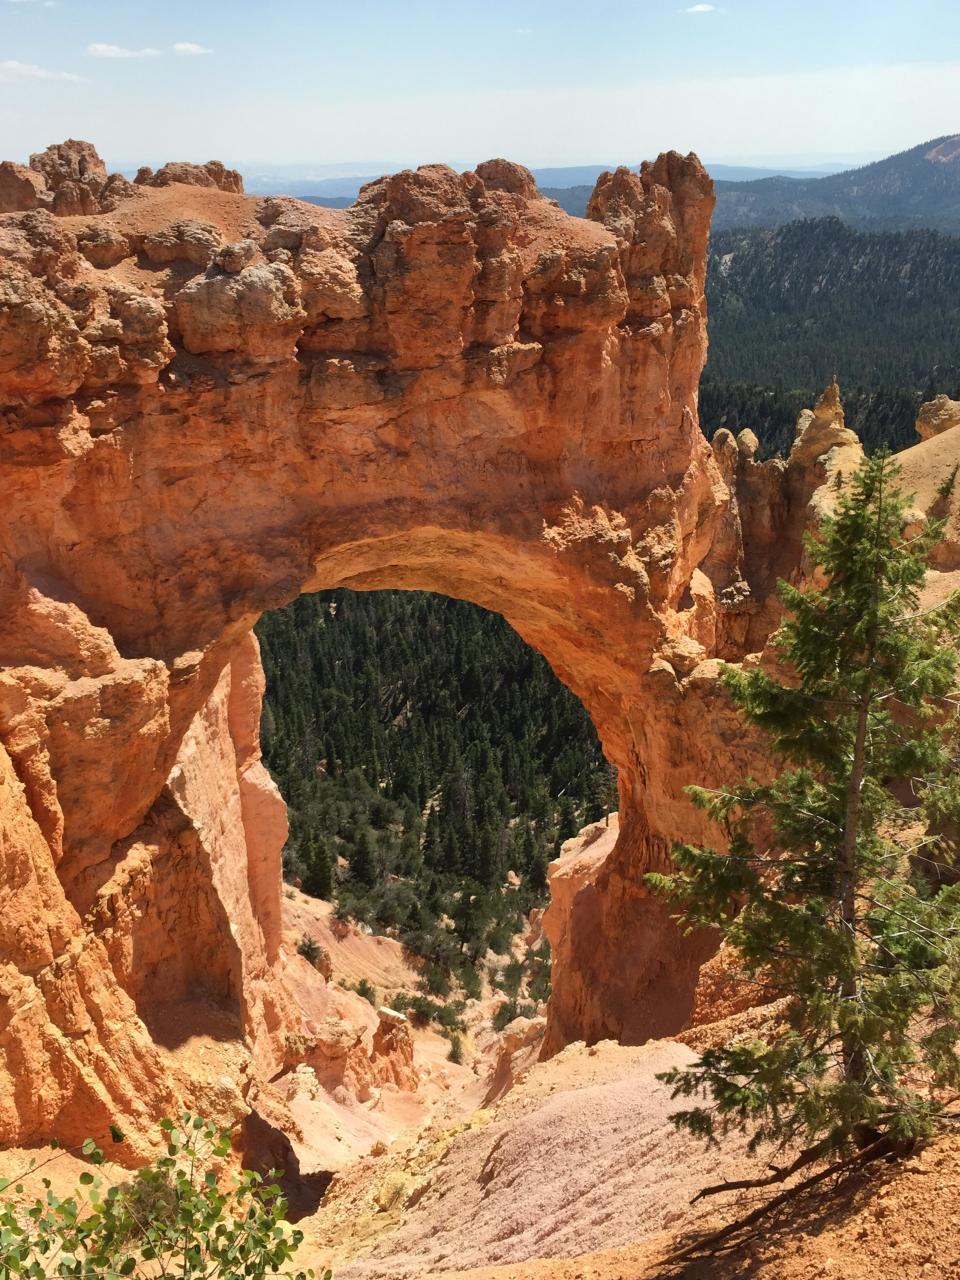 The   Natural Bridge in Bryce Canyon.